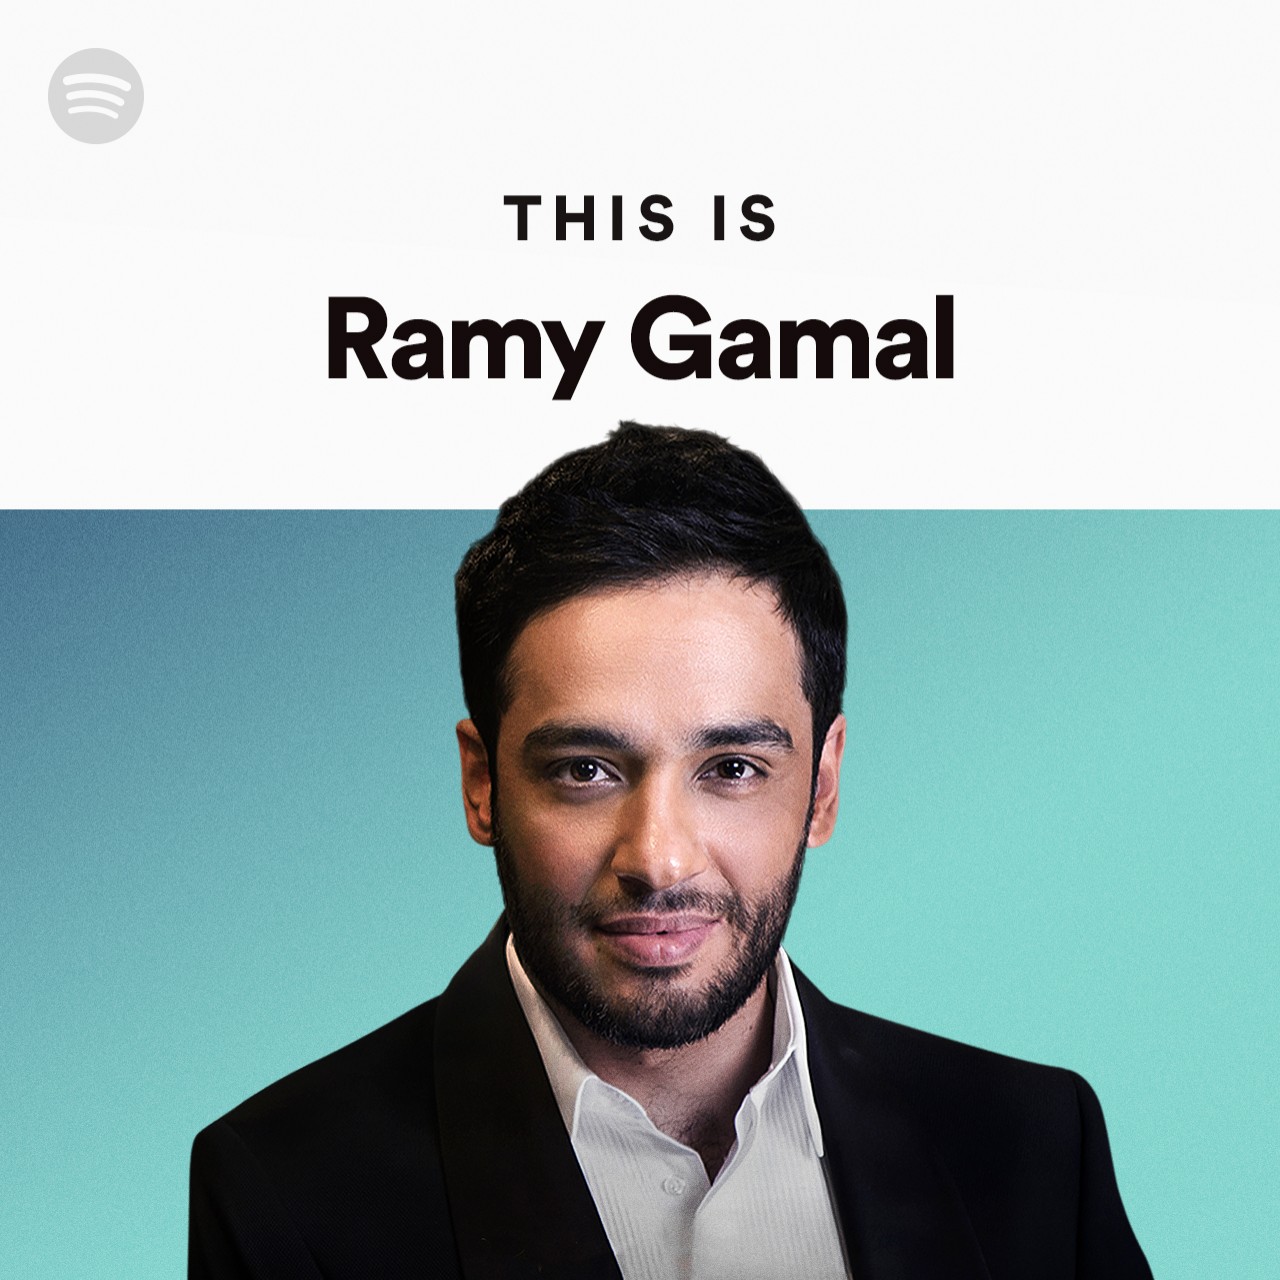 This Is Ramy Gamal